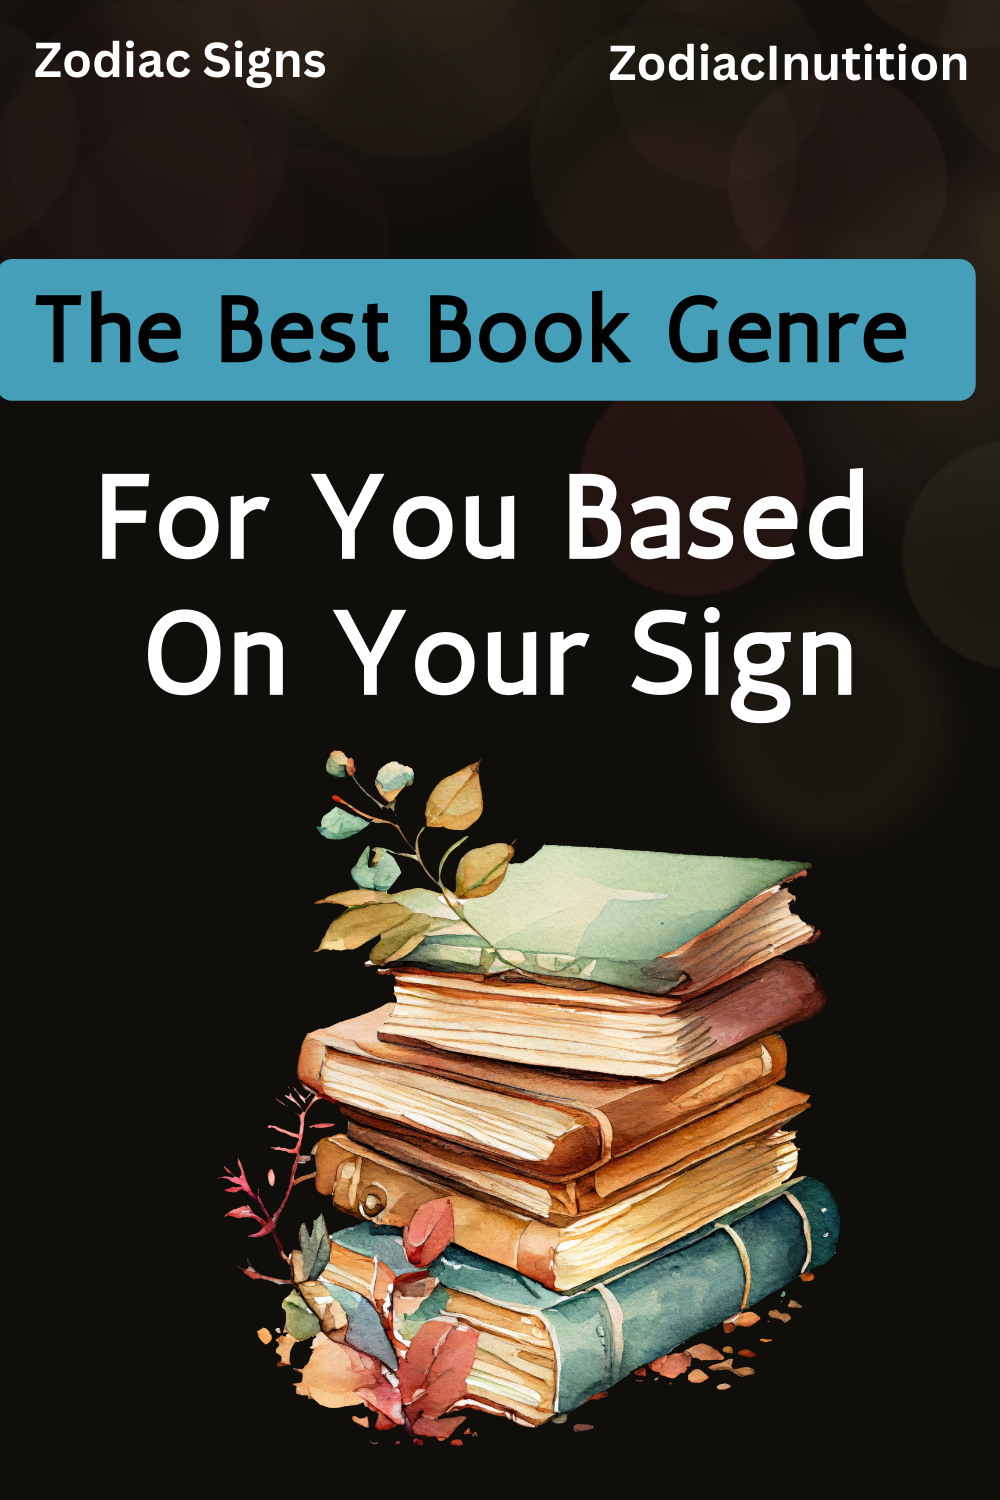 The Best Book Genre For You Based On Your Sign